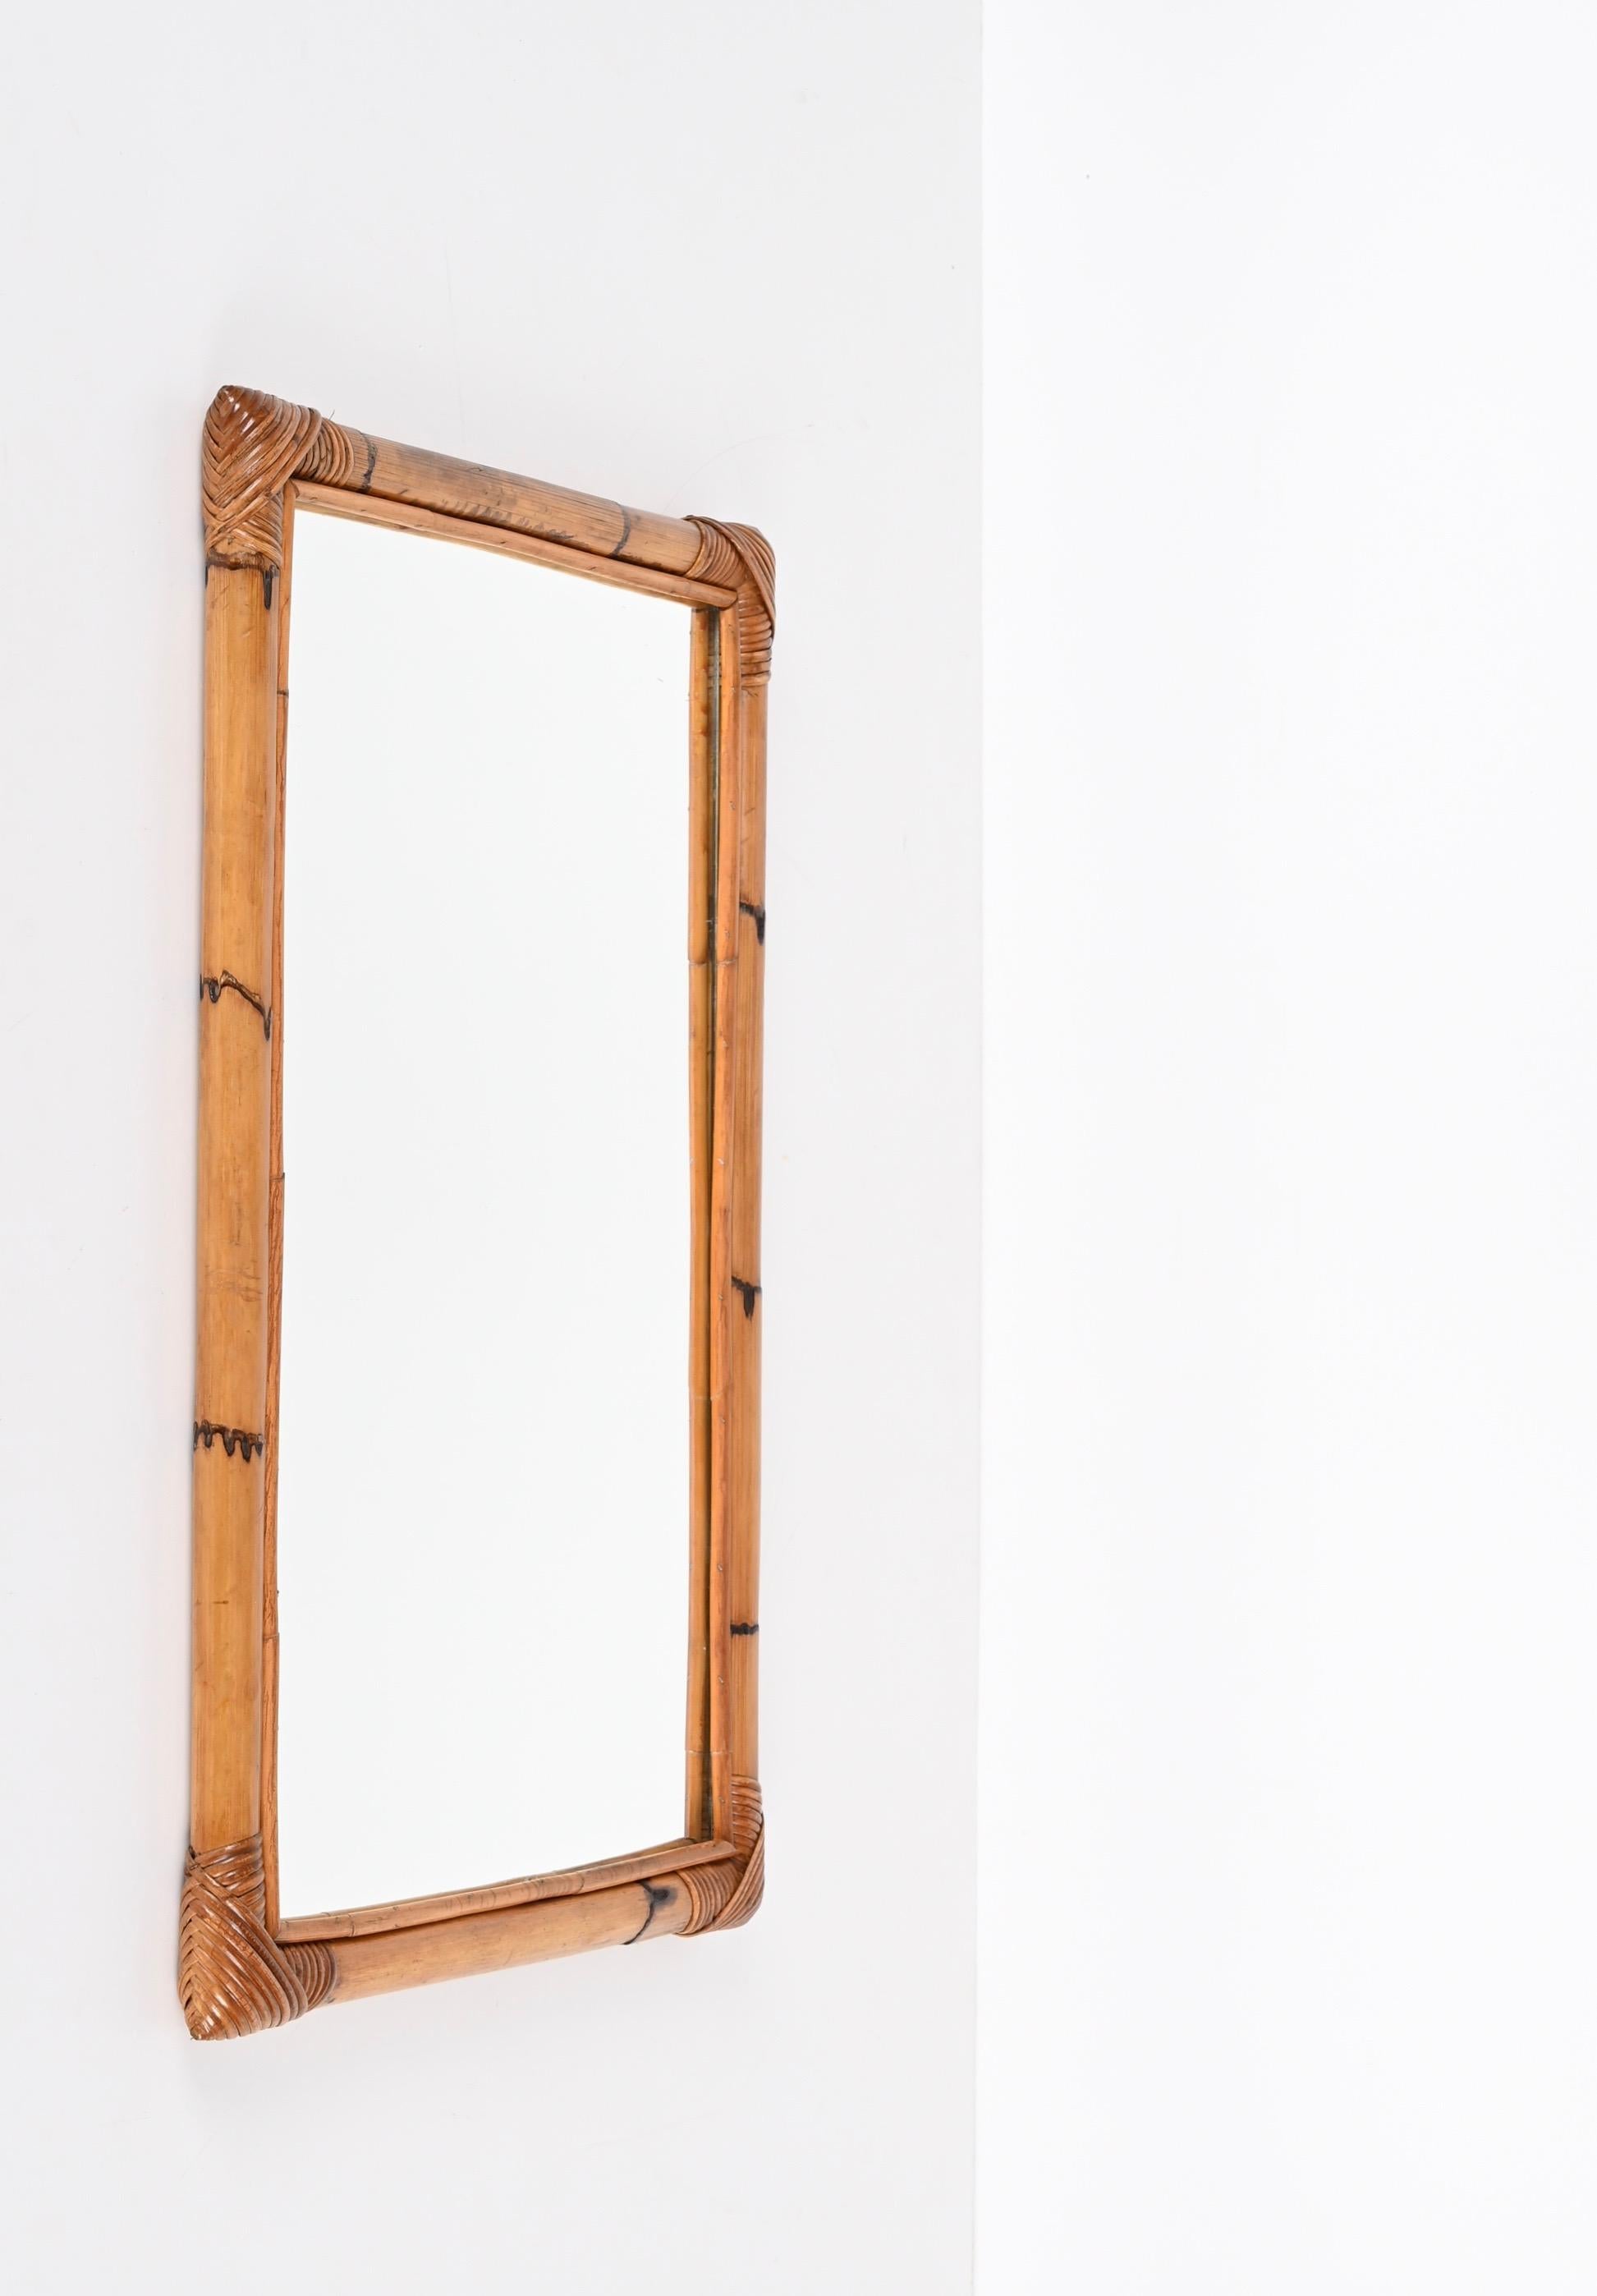 Midcentury Rectangular Italian Mirror with Double Bamboo Cane Frame, 1970s For Sale 1